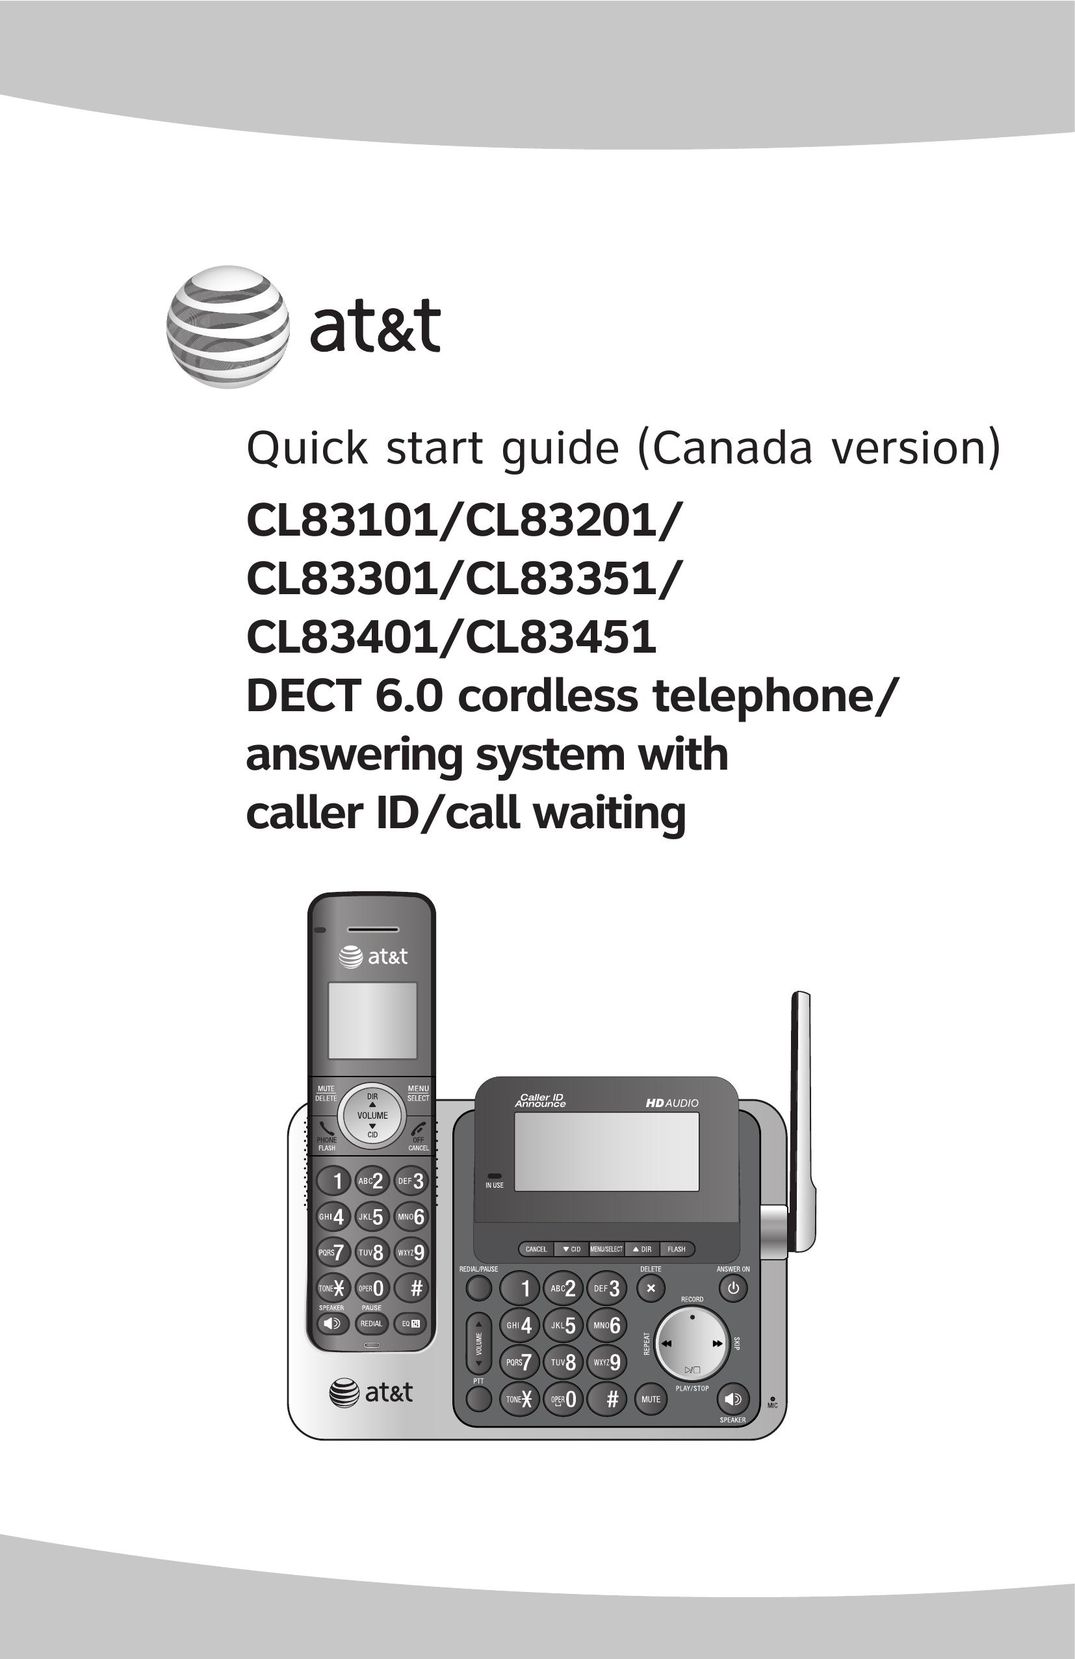 A & T International CL83351 Cordless Telephone User Manual